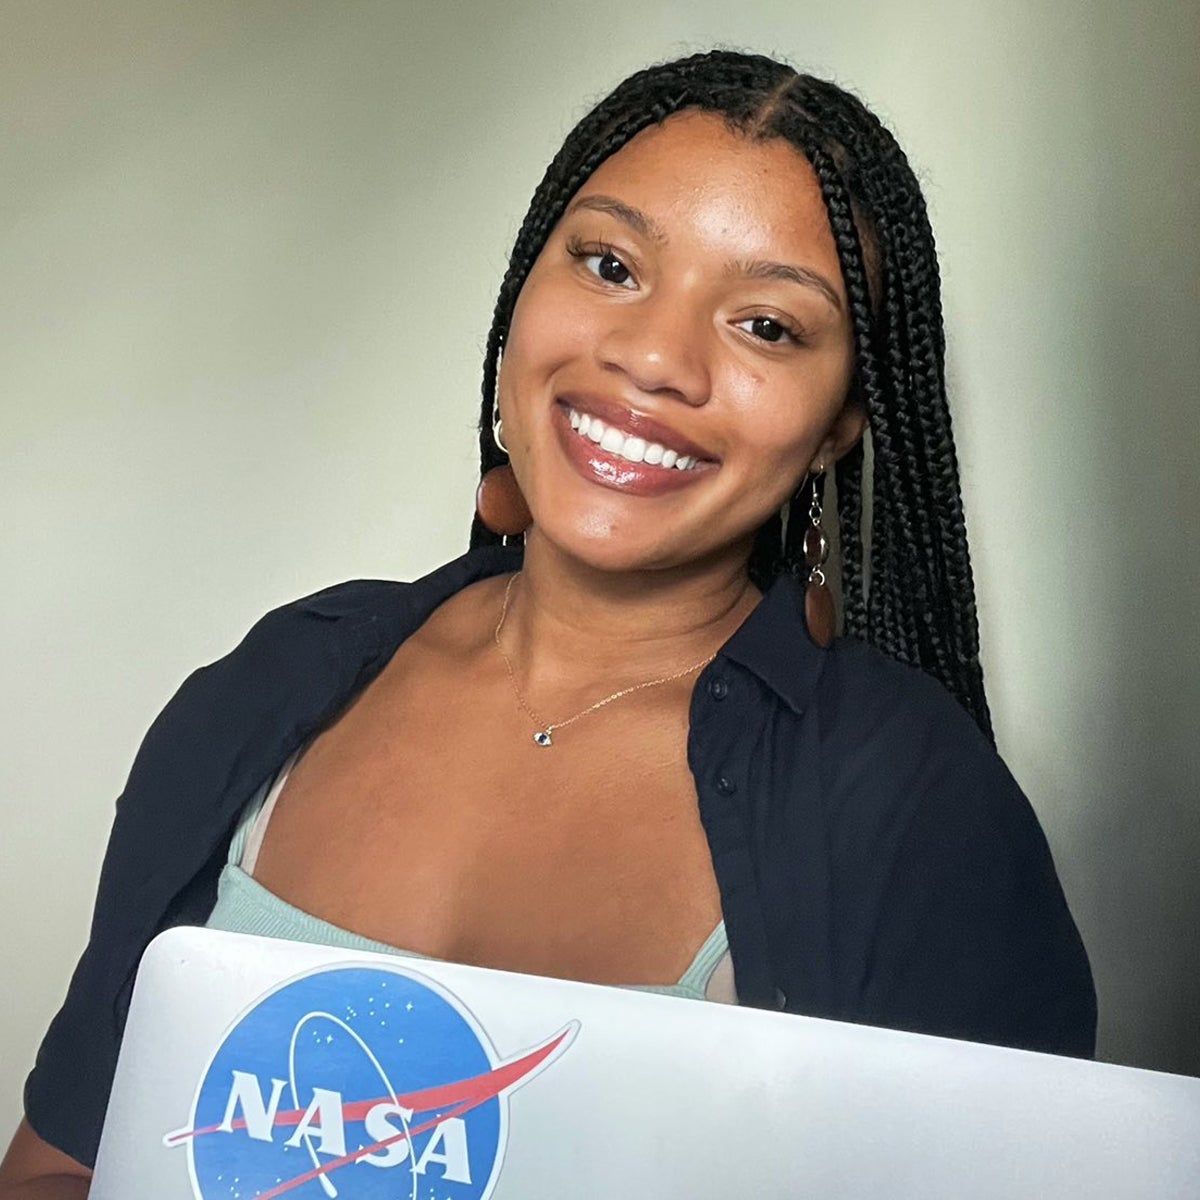 Nia Asemota in front of her laptop with a NASA sticket